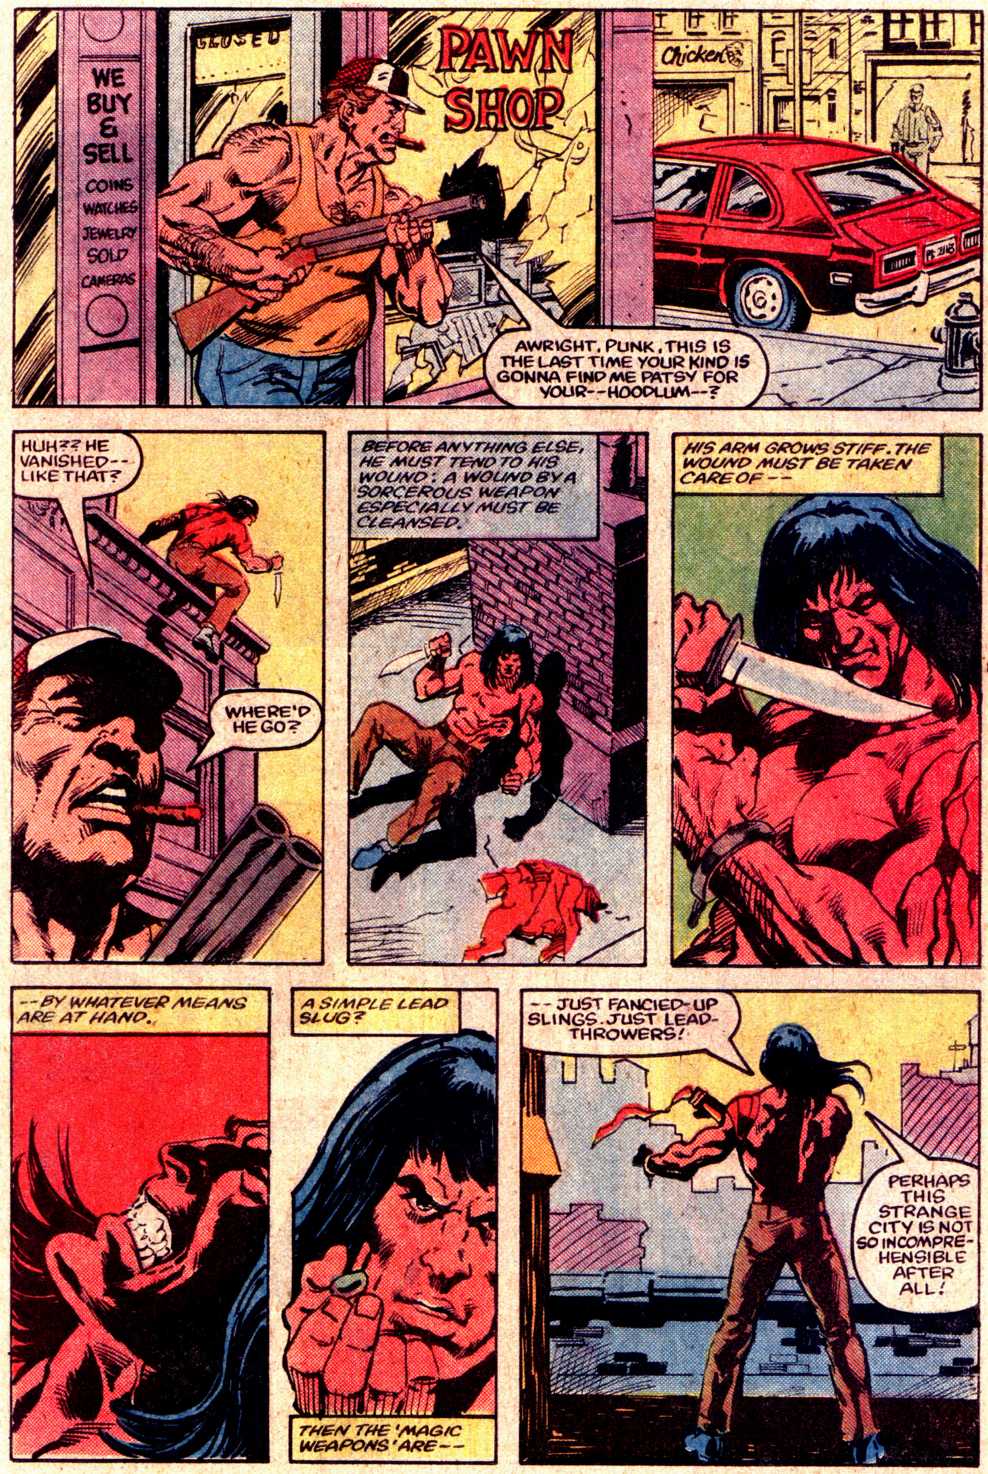 What If? (1977) issue 43 - Conan the Barbarian were stranded in the 20th century - Page 8